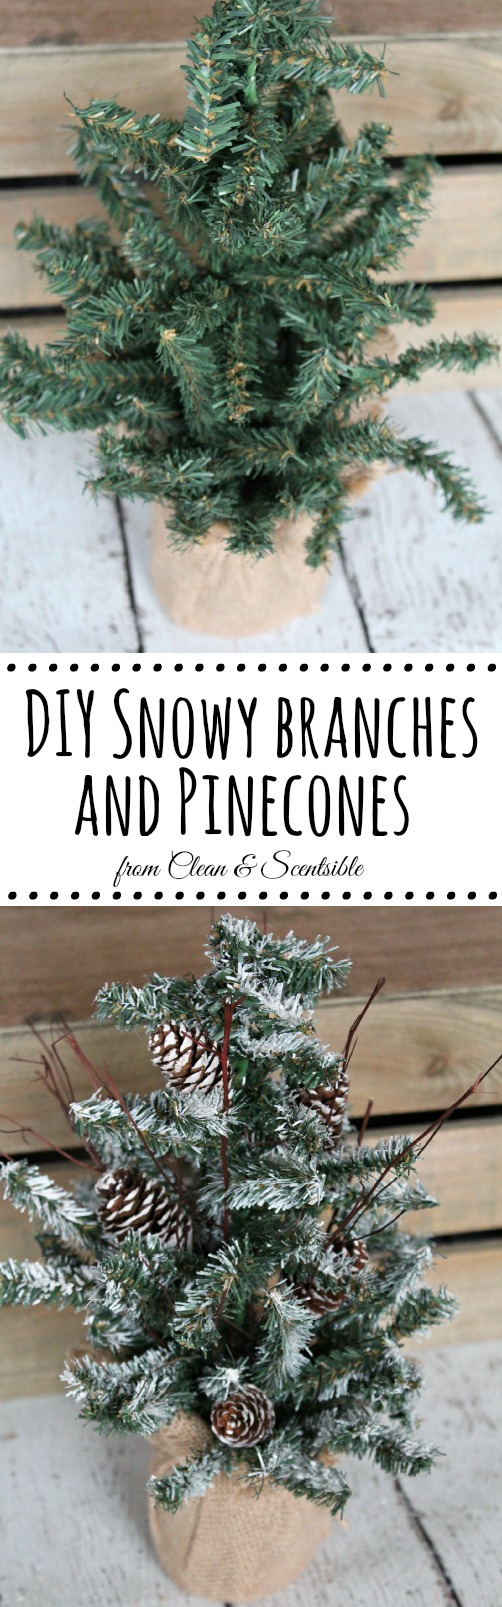 Transform a plain, inexpensive tree into a pretty snow covered tree with glittered pine cones. // cleanandscentsible.com